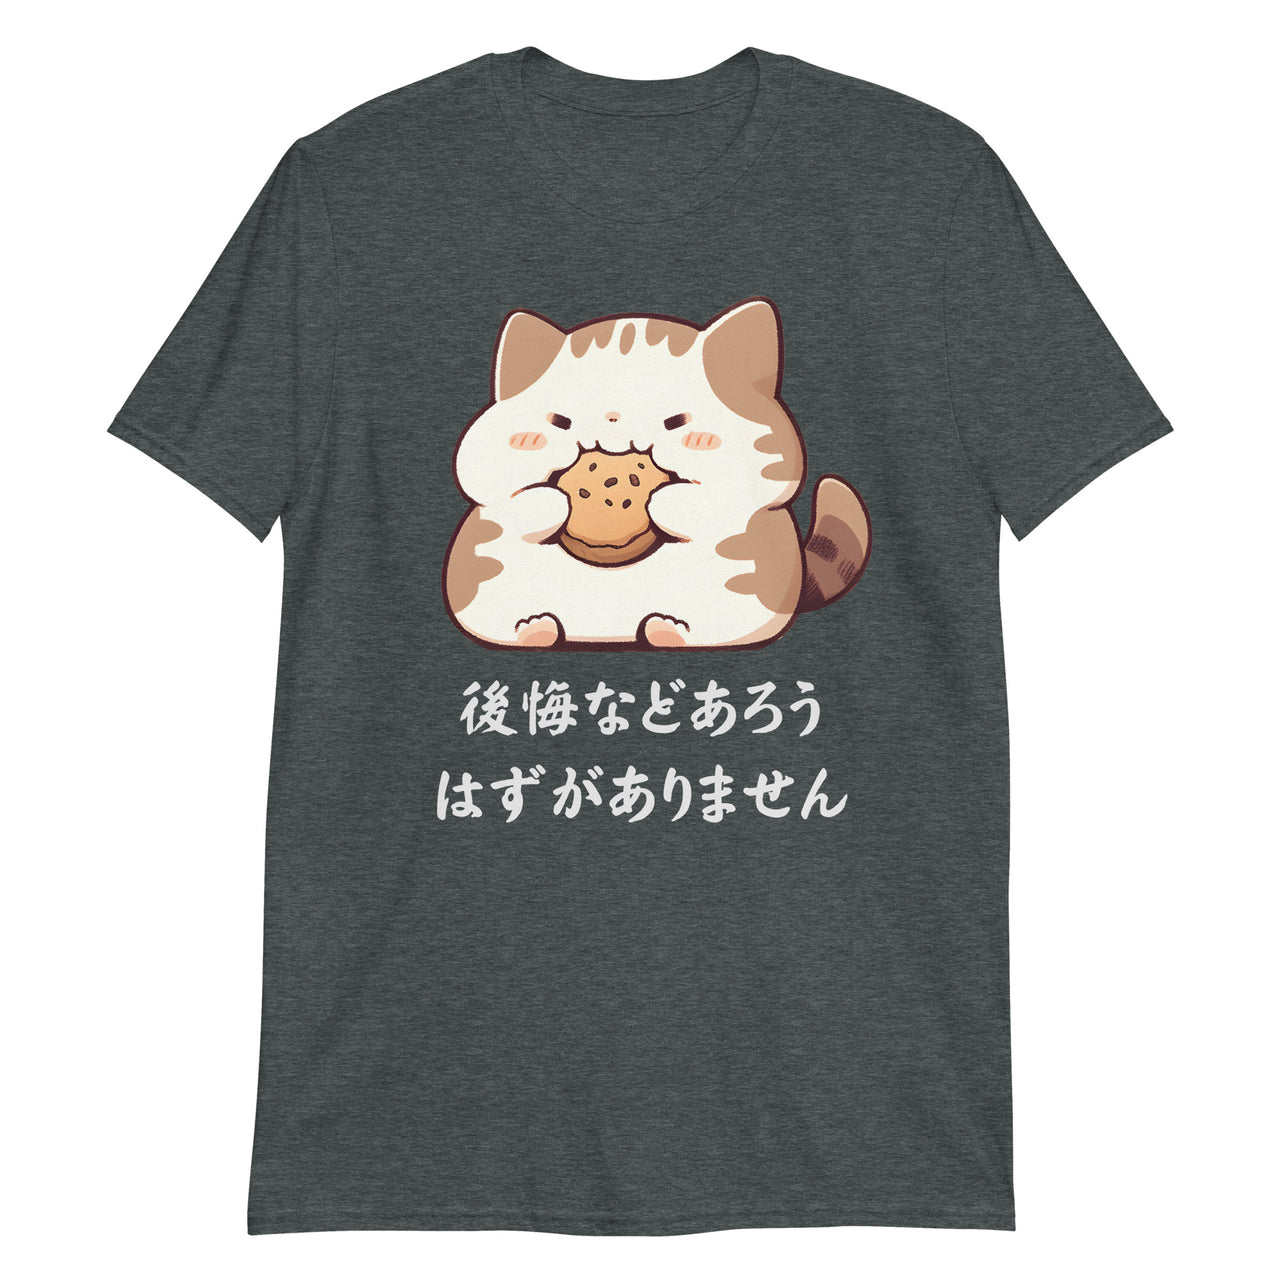 Anime Cat's No-Regret Cookie in Japanese T-Shirt